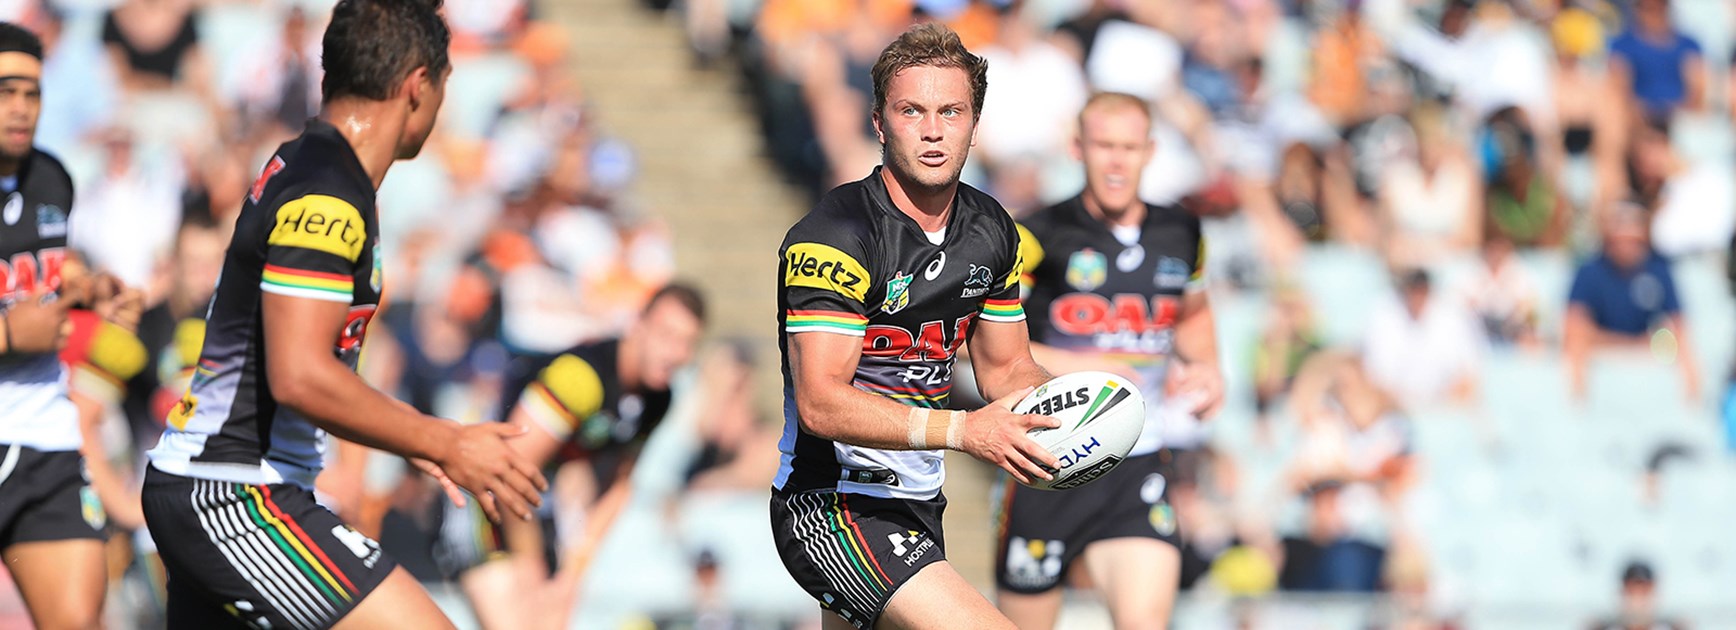 Penrith captain Matt Moylan in action against Wests Tigers in Round 2 of the Telstra Premiership.